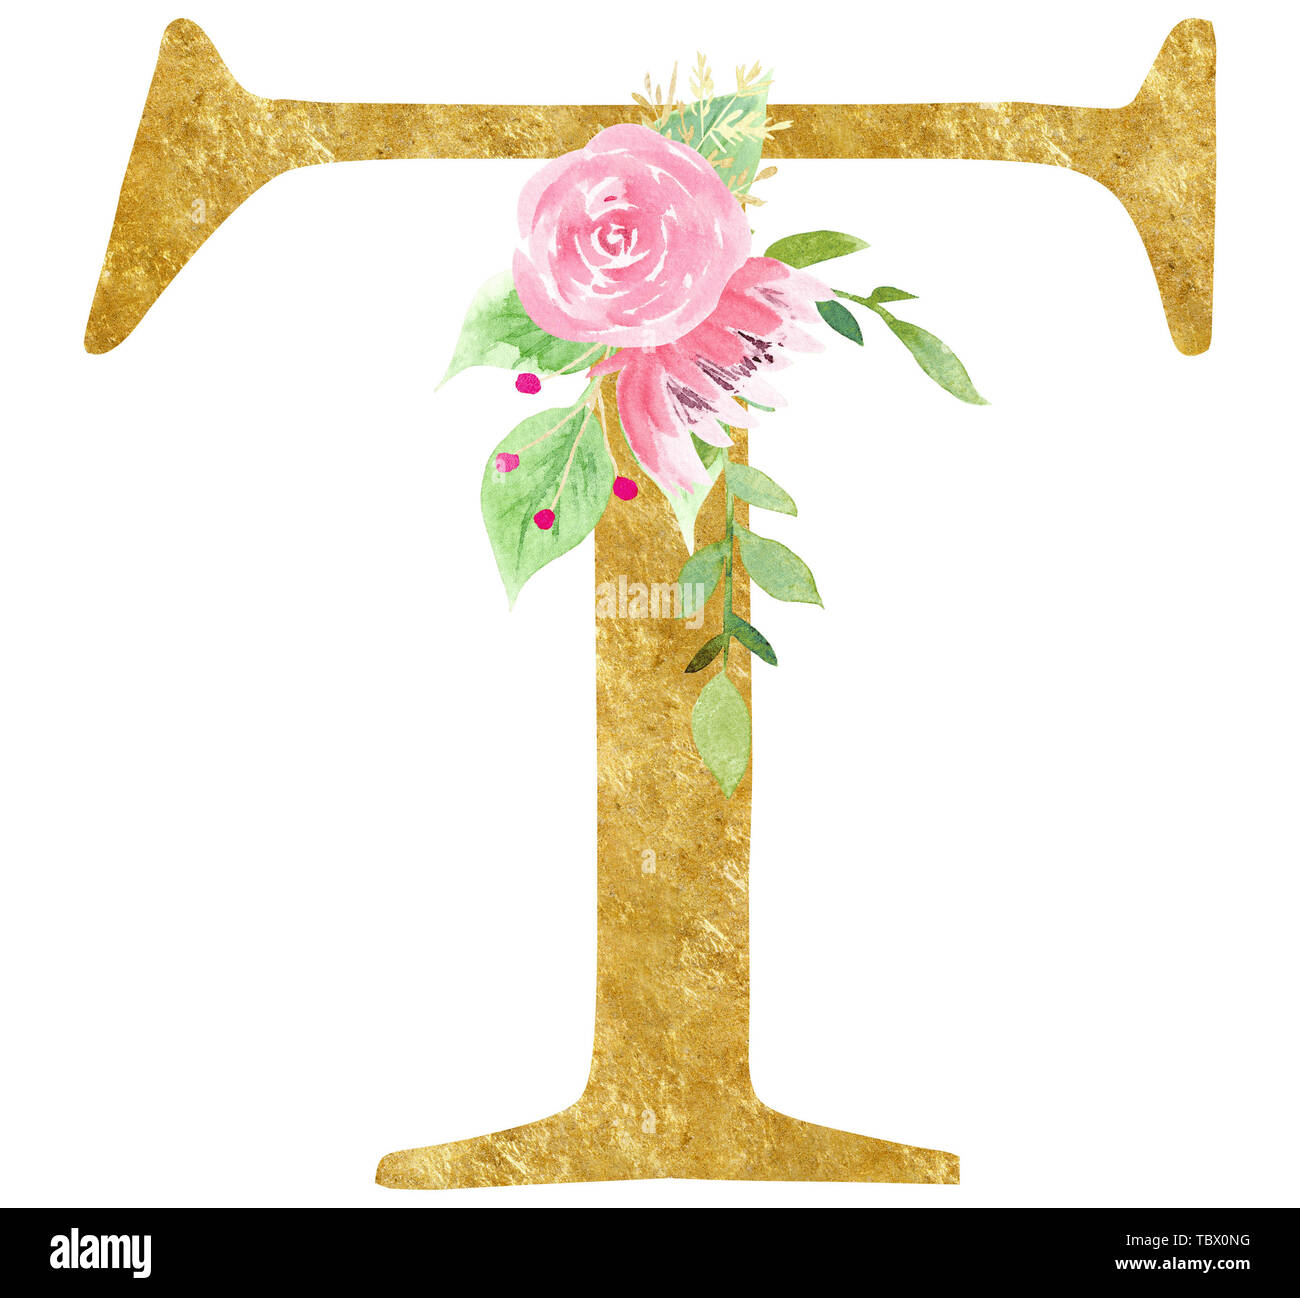 T letter with pink blossom raster illustration. Golden latin consonant watercolor painting. Cardboard alphabet symbol with beautiful rose and lotus. B Stock Photo